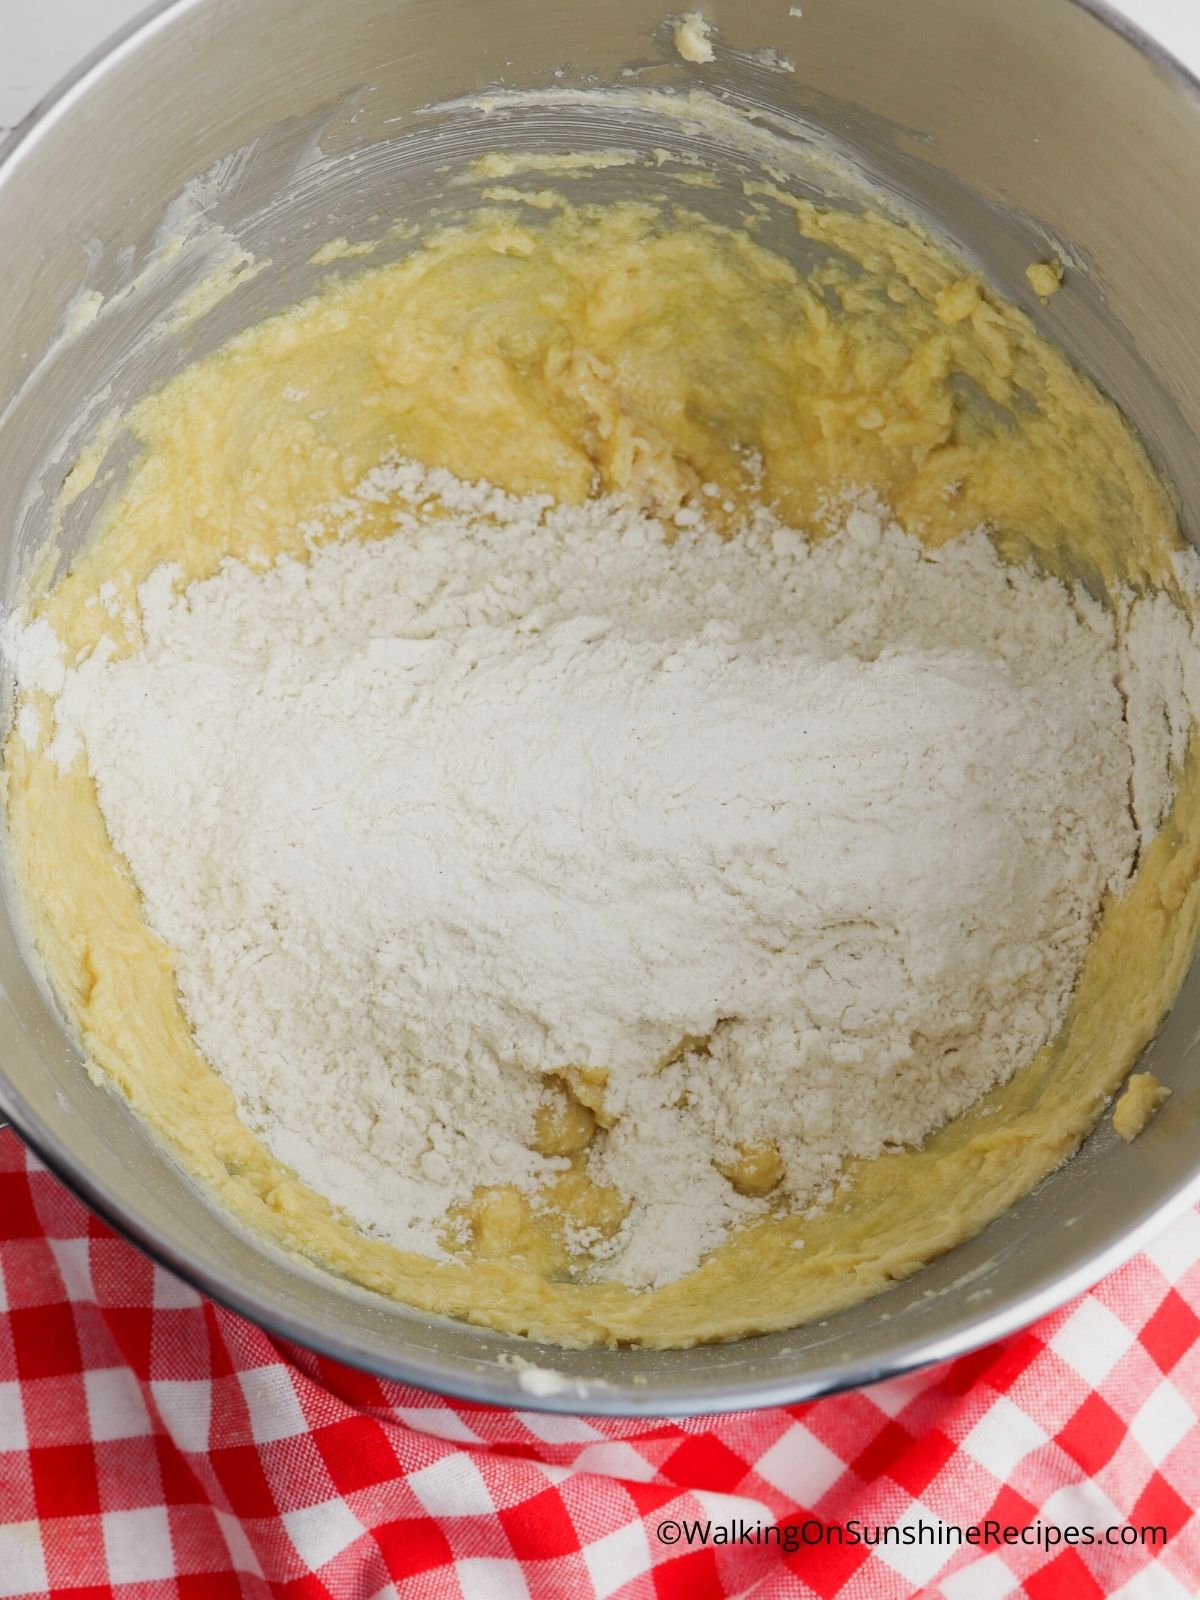 Add flour mixture to butter and sugar mixture.